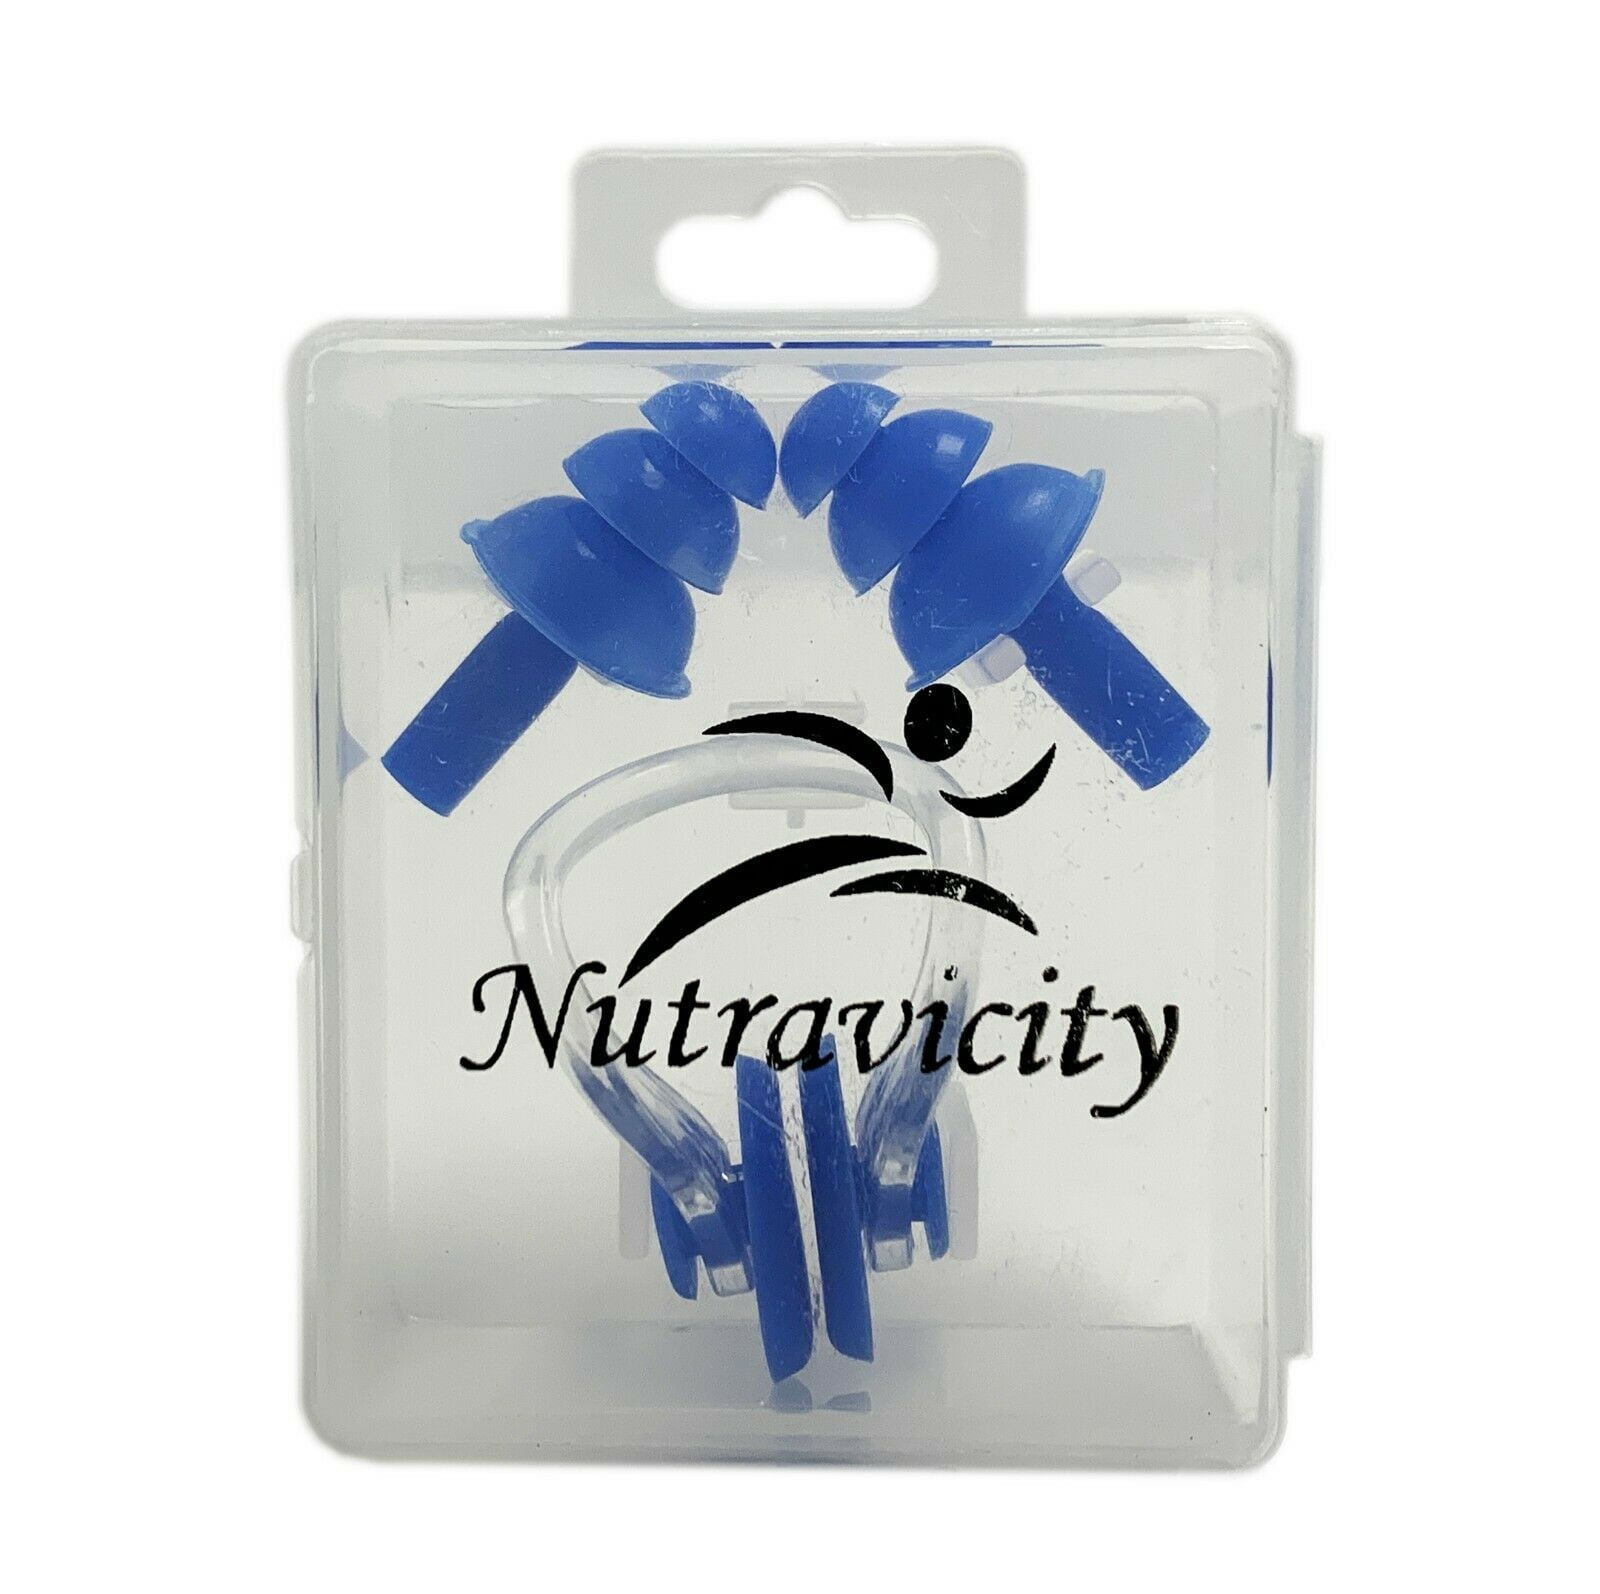 Nutravicity Silicone Swimming Ear Plugs and Nose Clip Set Orange 